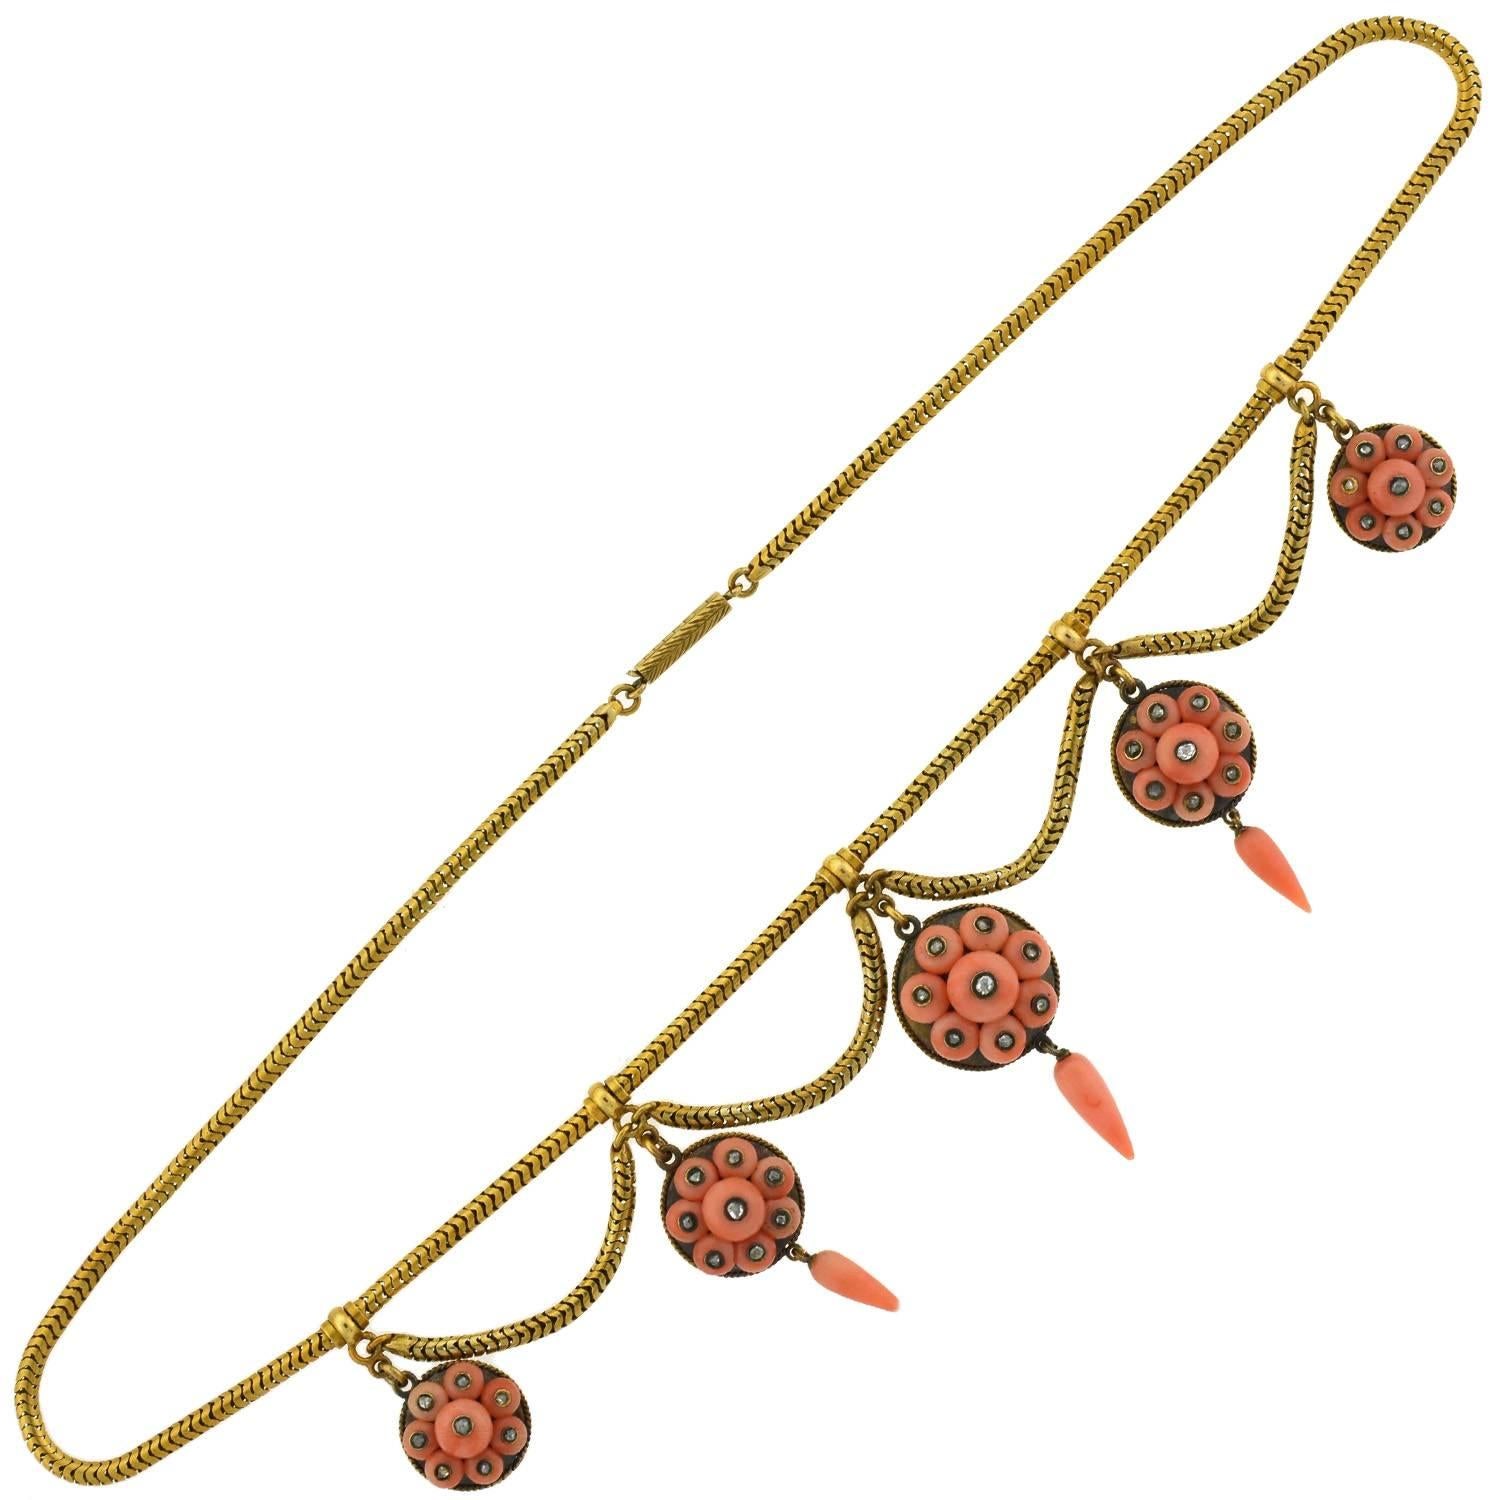 A beautiful coral necklace from the Victorian (ca1880) era! This stunning necklace features an ensemble of coral links that hang from a 15kt gold chain in a festoon fashion. The graduated links have matching cluster designs, with delicate accent